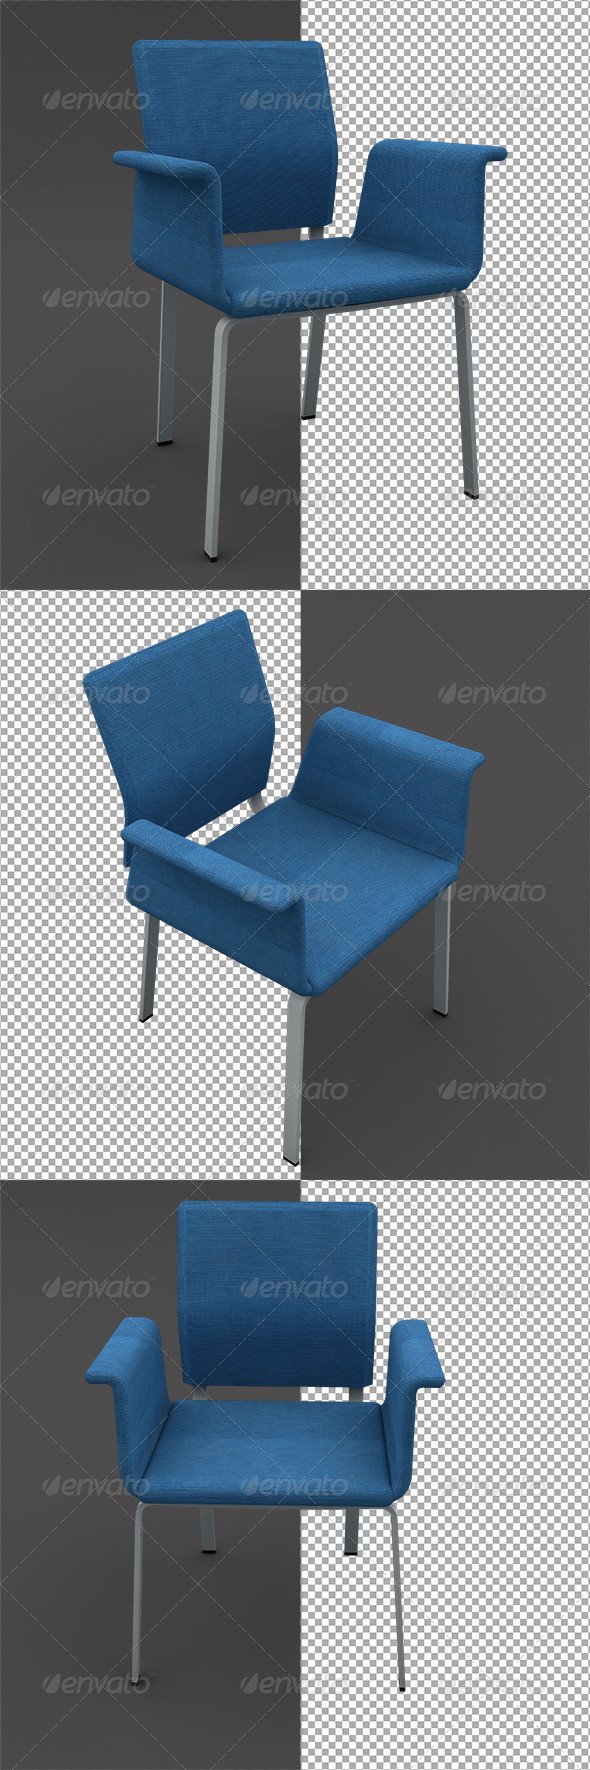 Arm 20chair 20number 204 20preview 20all